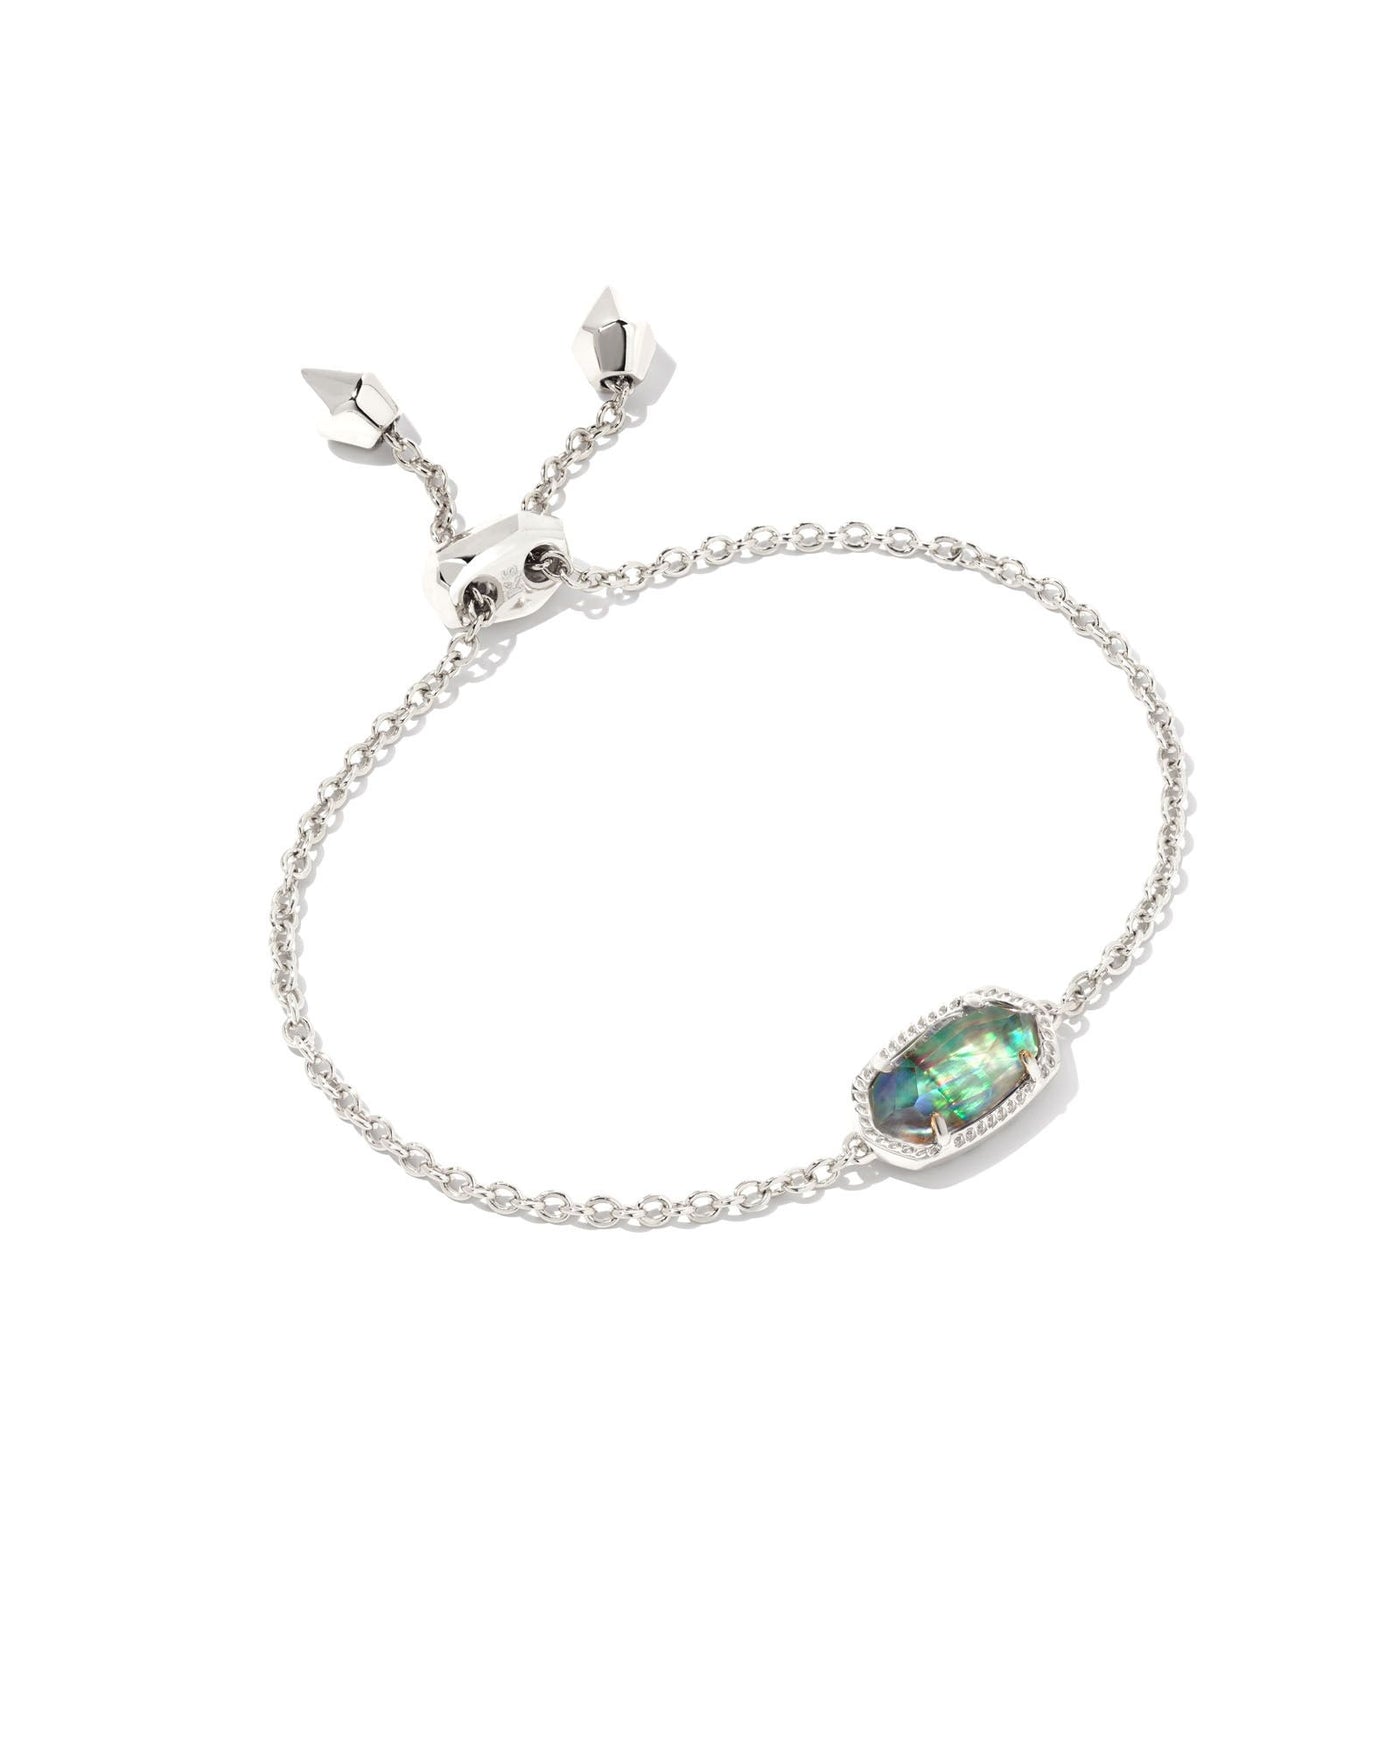 Kendra Scott Elaina Silver Adjustable Chain Bracelet in Lilac Abalone-Bracelets-Kendra Scott-Market Street Nest, Fashionable Clothing, Shoes and Home Décor Located in Mabank, TX